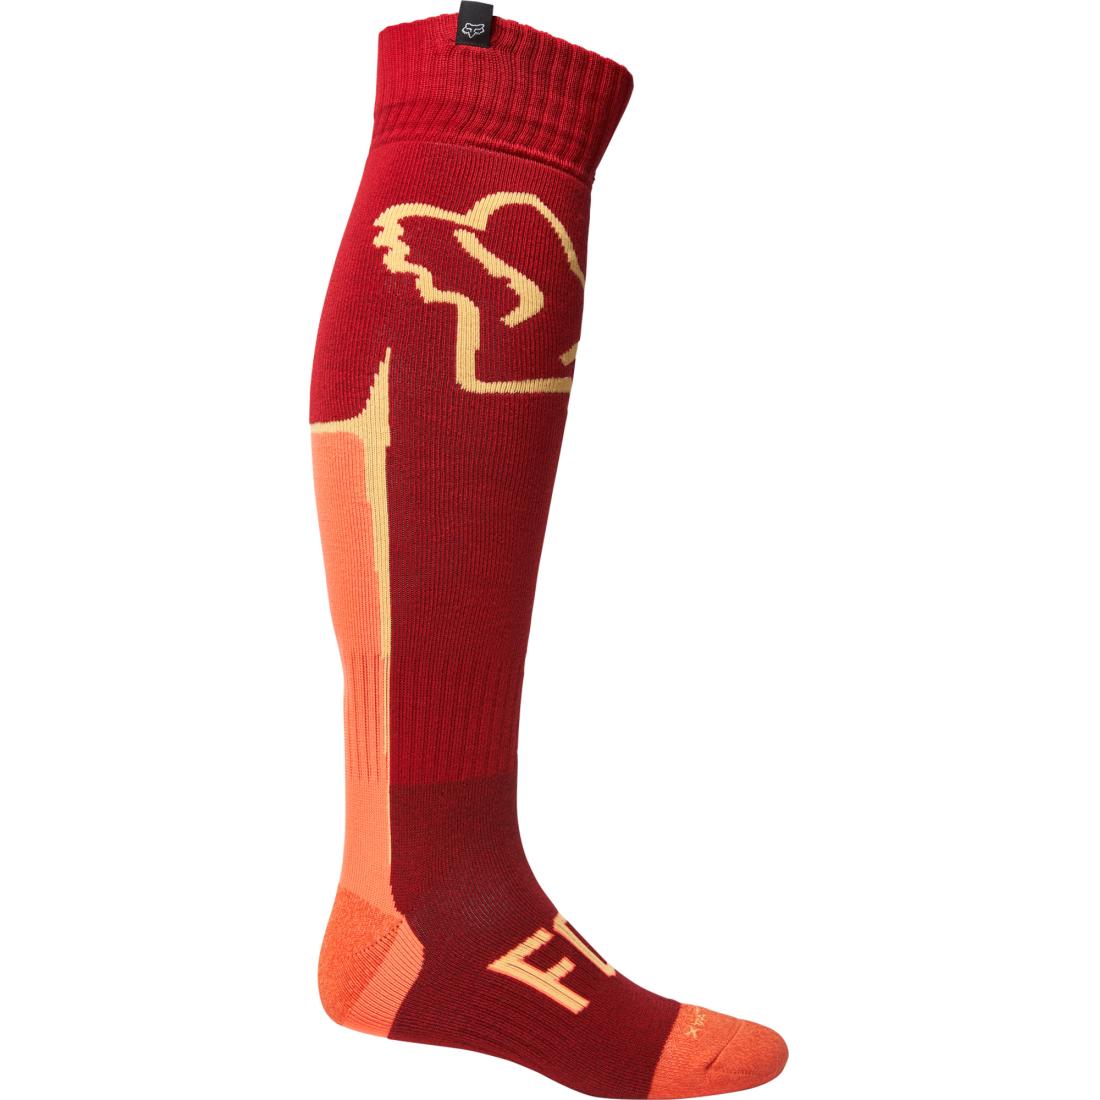 Cntro Coolmax Thin Sock Flame Red